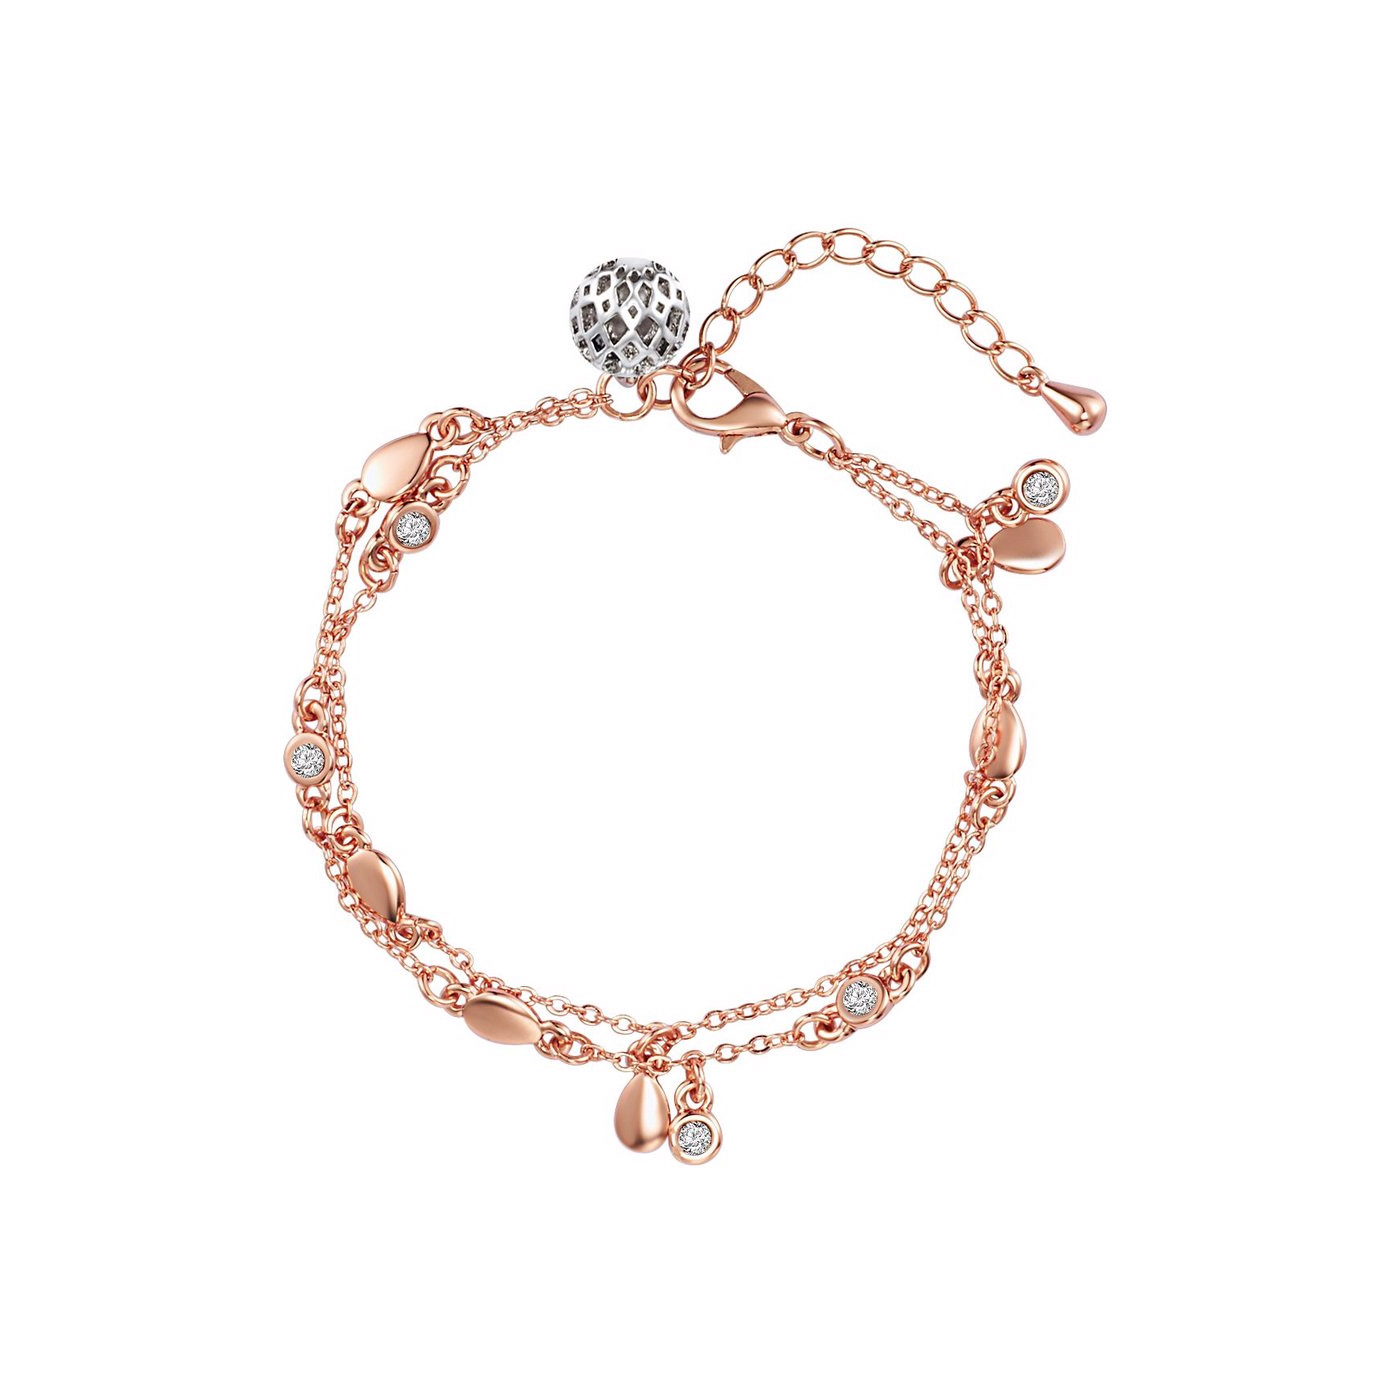 OEM/ODM Jewelry jewelry designs rose gold plated rhodium plated bracelet supplier